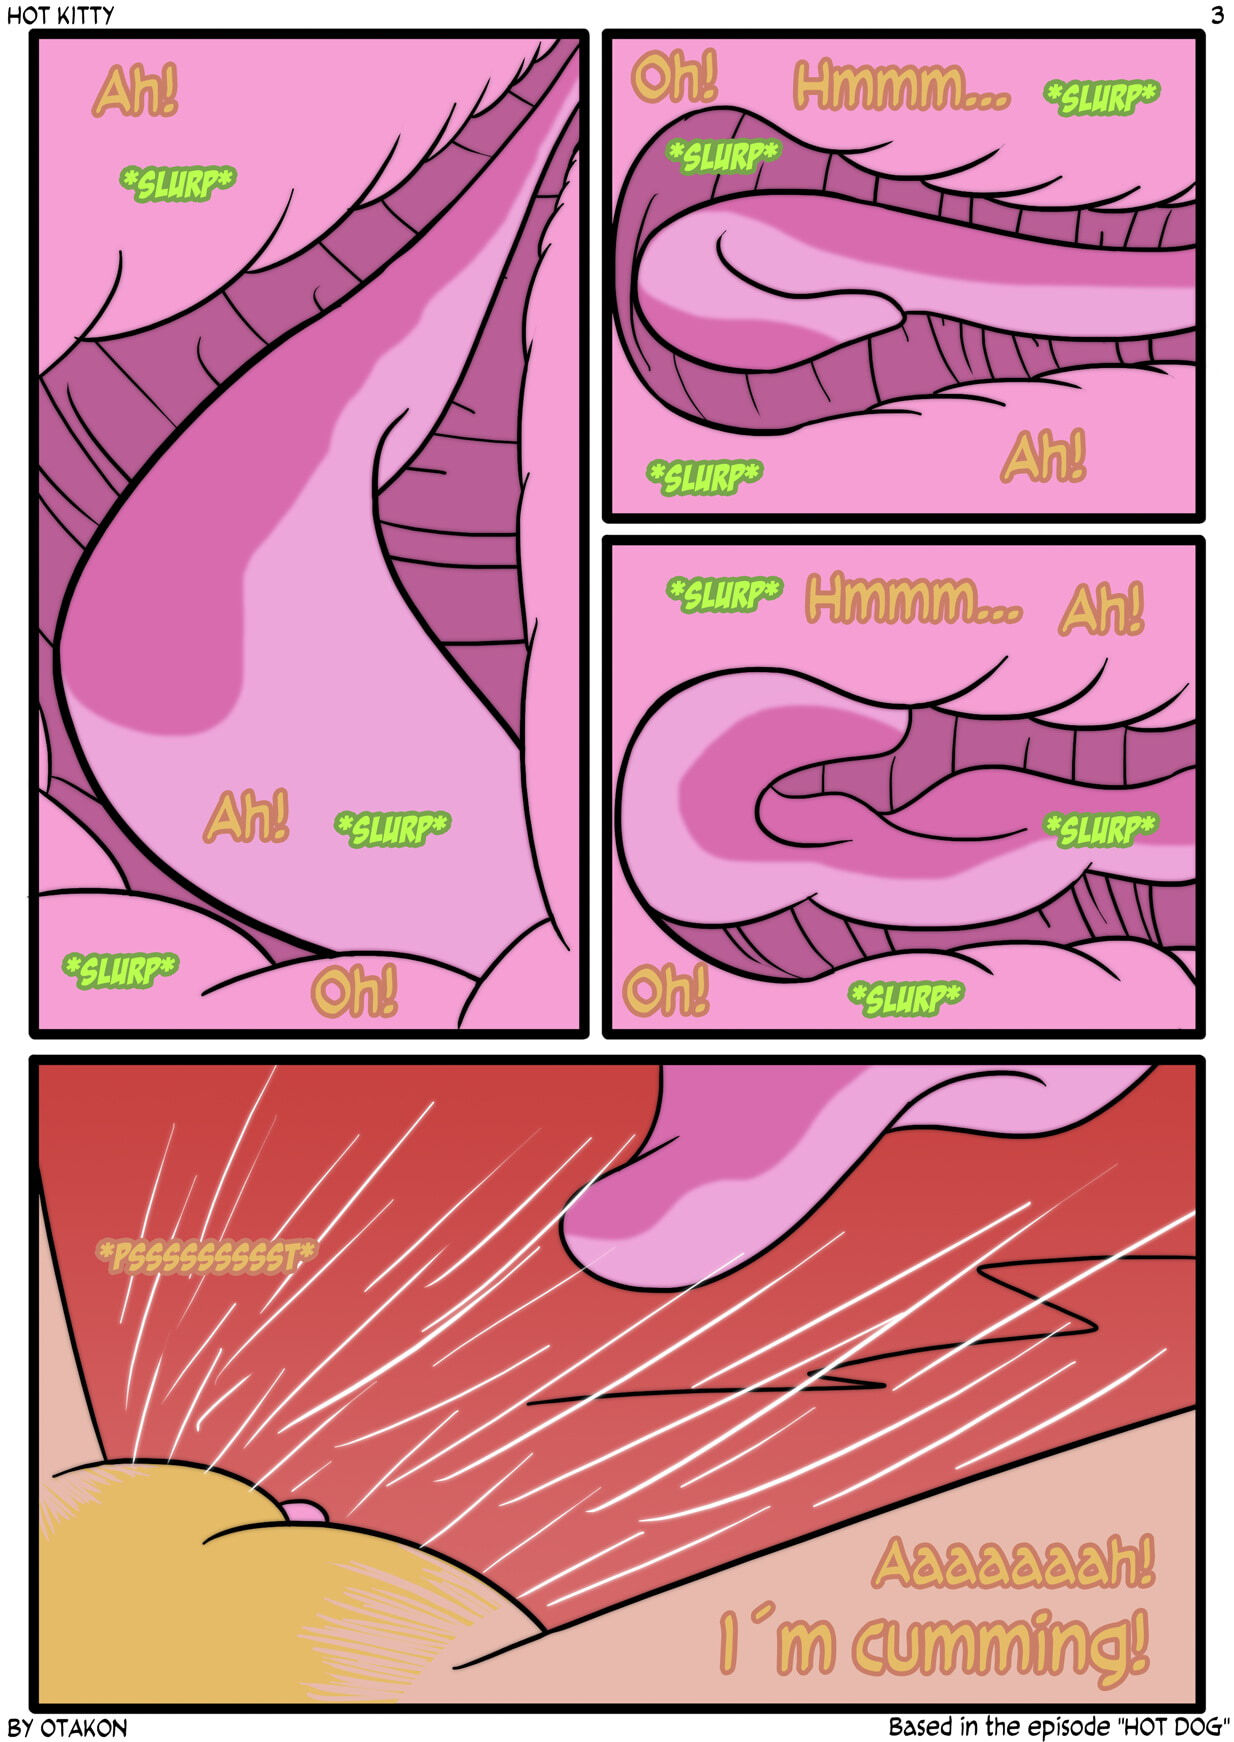 Hot Kitty - Page 7